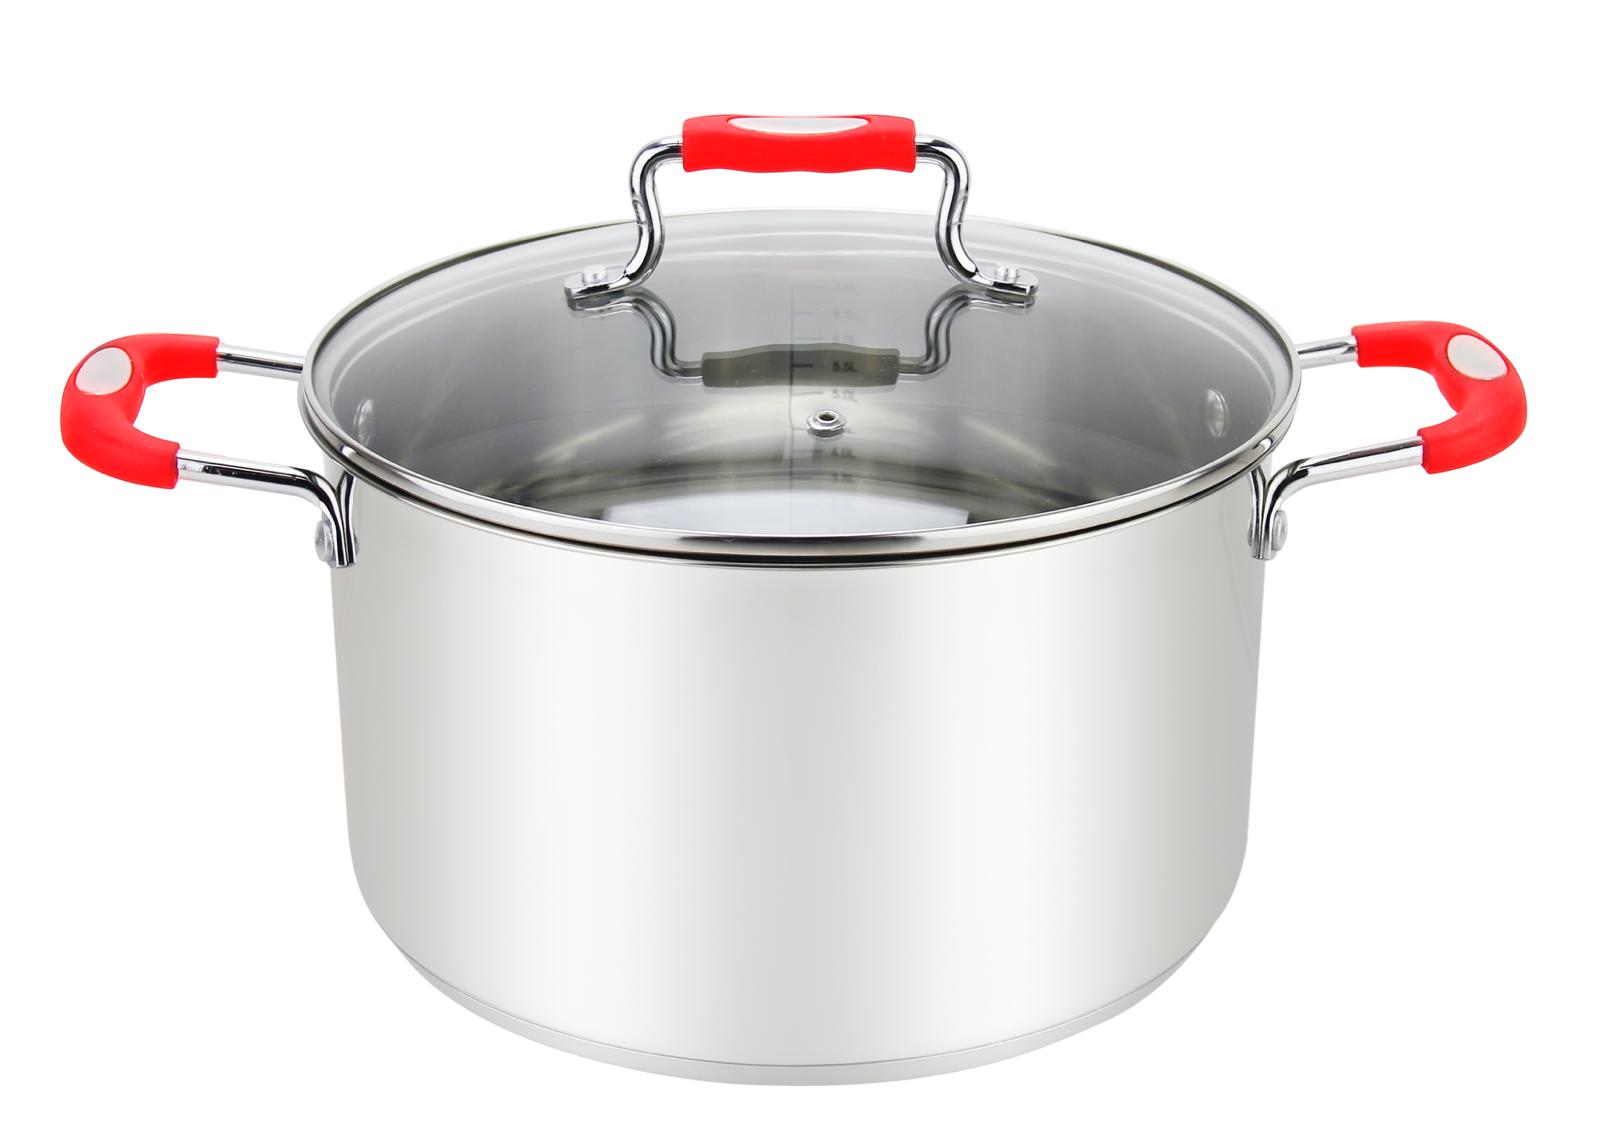 Millvado-Urban Stainless Steel Pot with Glass Cover, Red Silicone Handles, Various Sizes